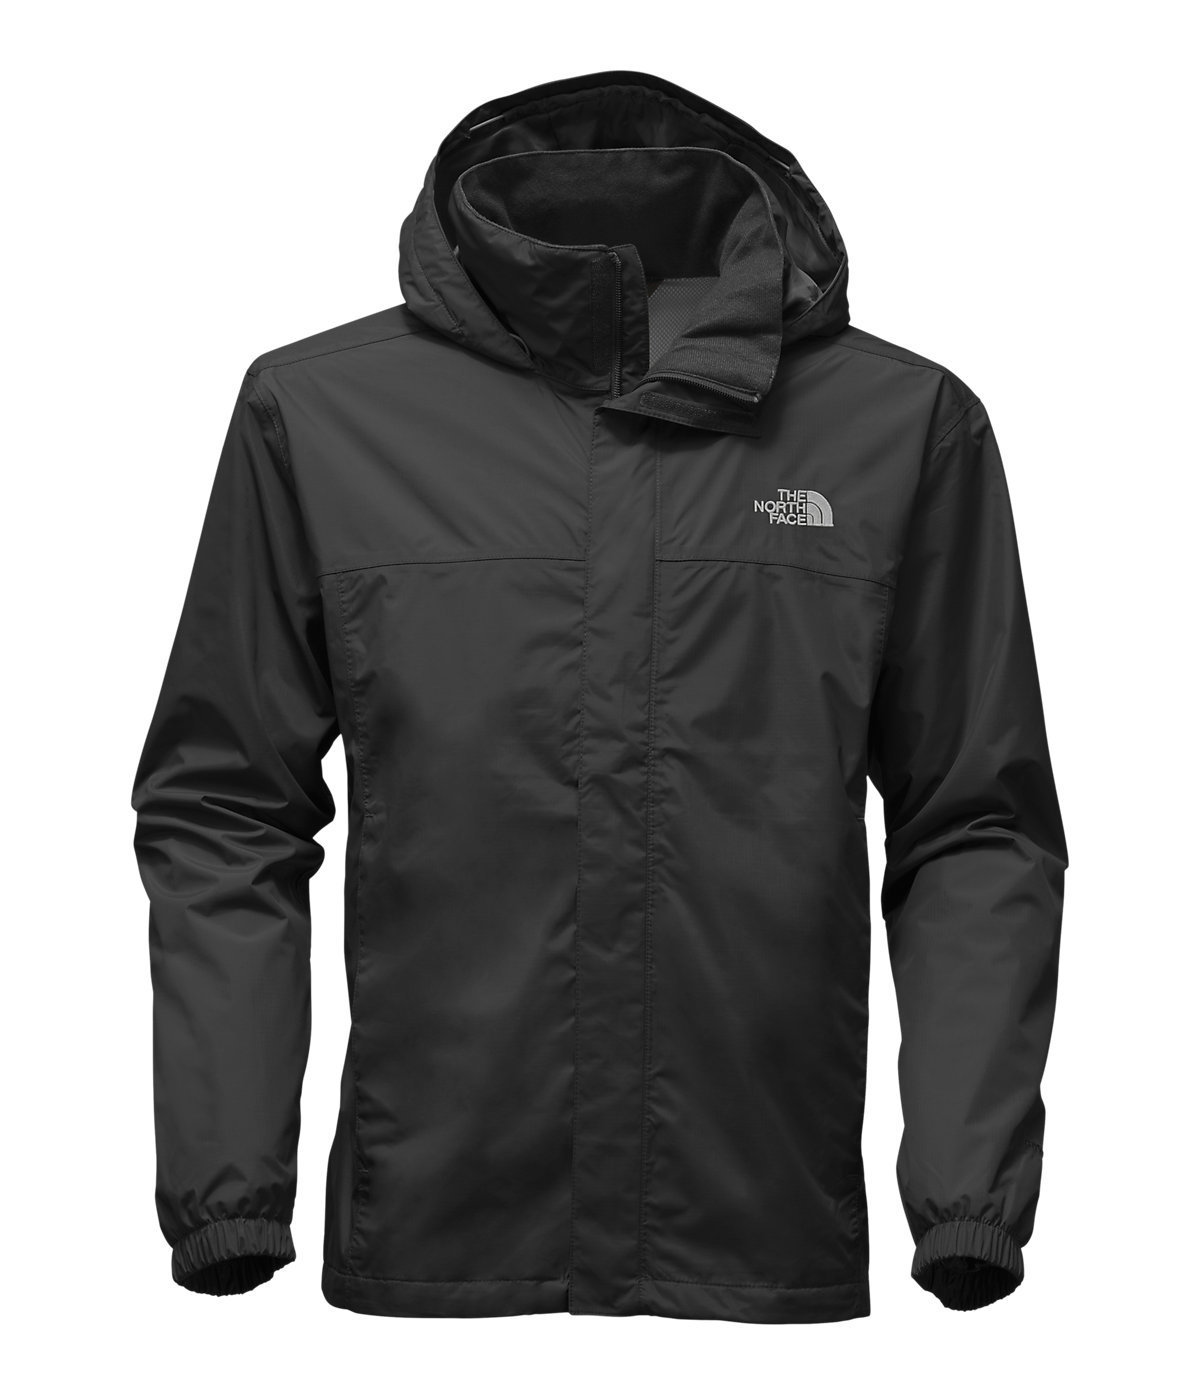 The North Face】MEN'S RESOLVE 2 JACKET 